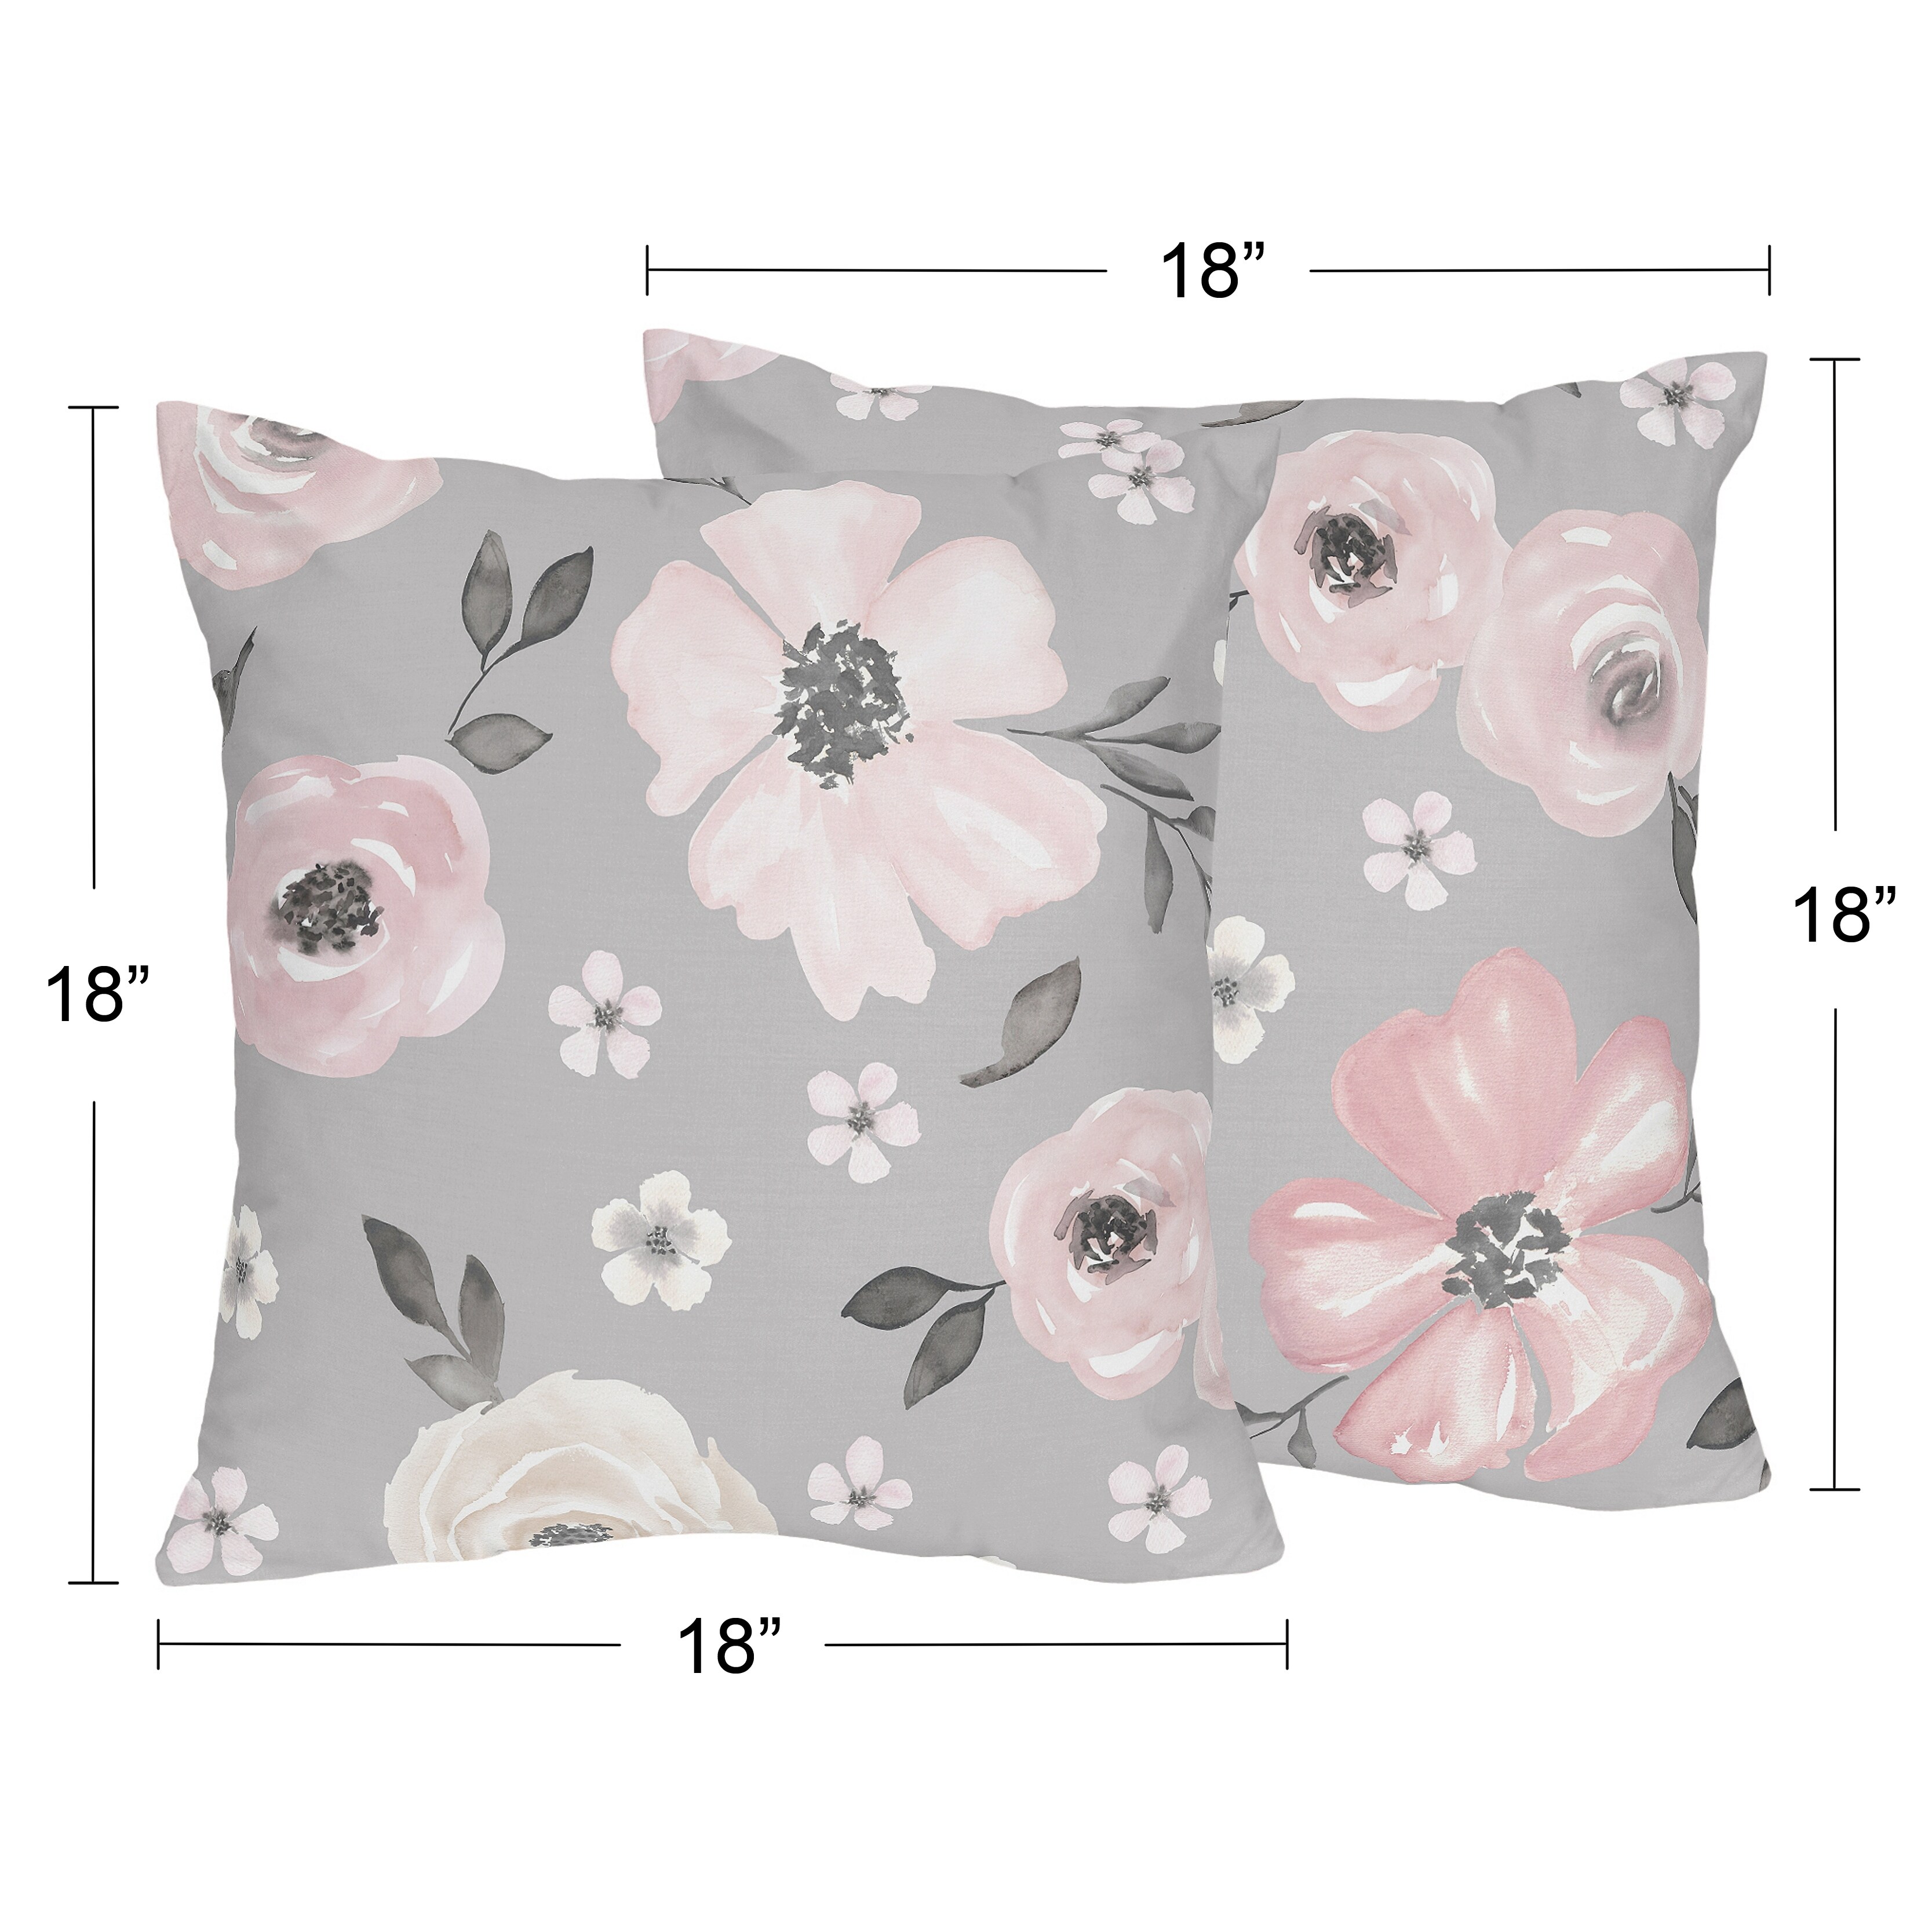 Grey Watercolor Floral 18in Decorative Accent Throw Pillows (Set of 2) - Blush Pink Gray Shabby Chic Rose Flower Farmhouse